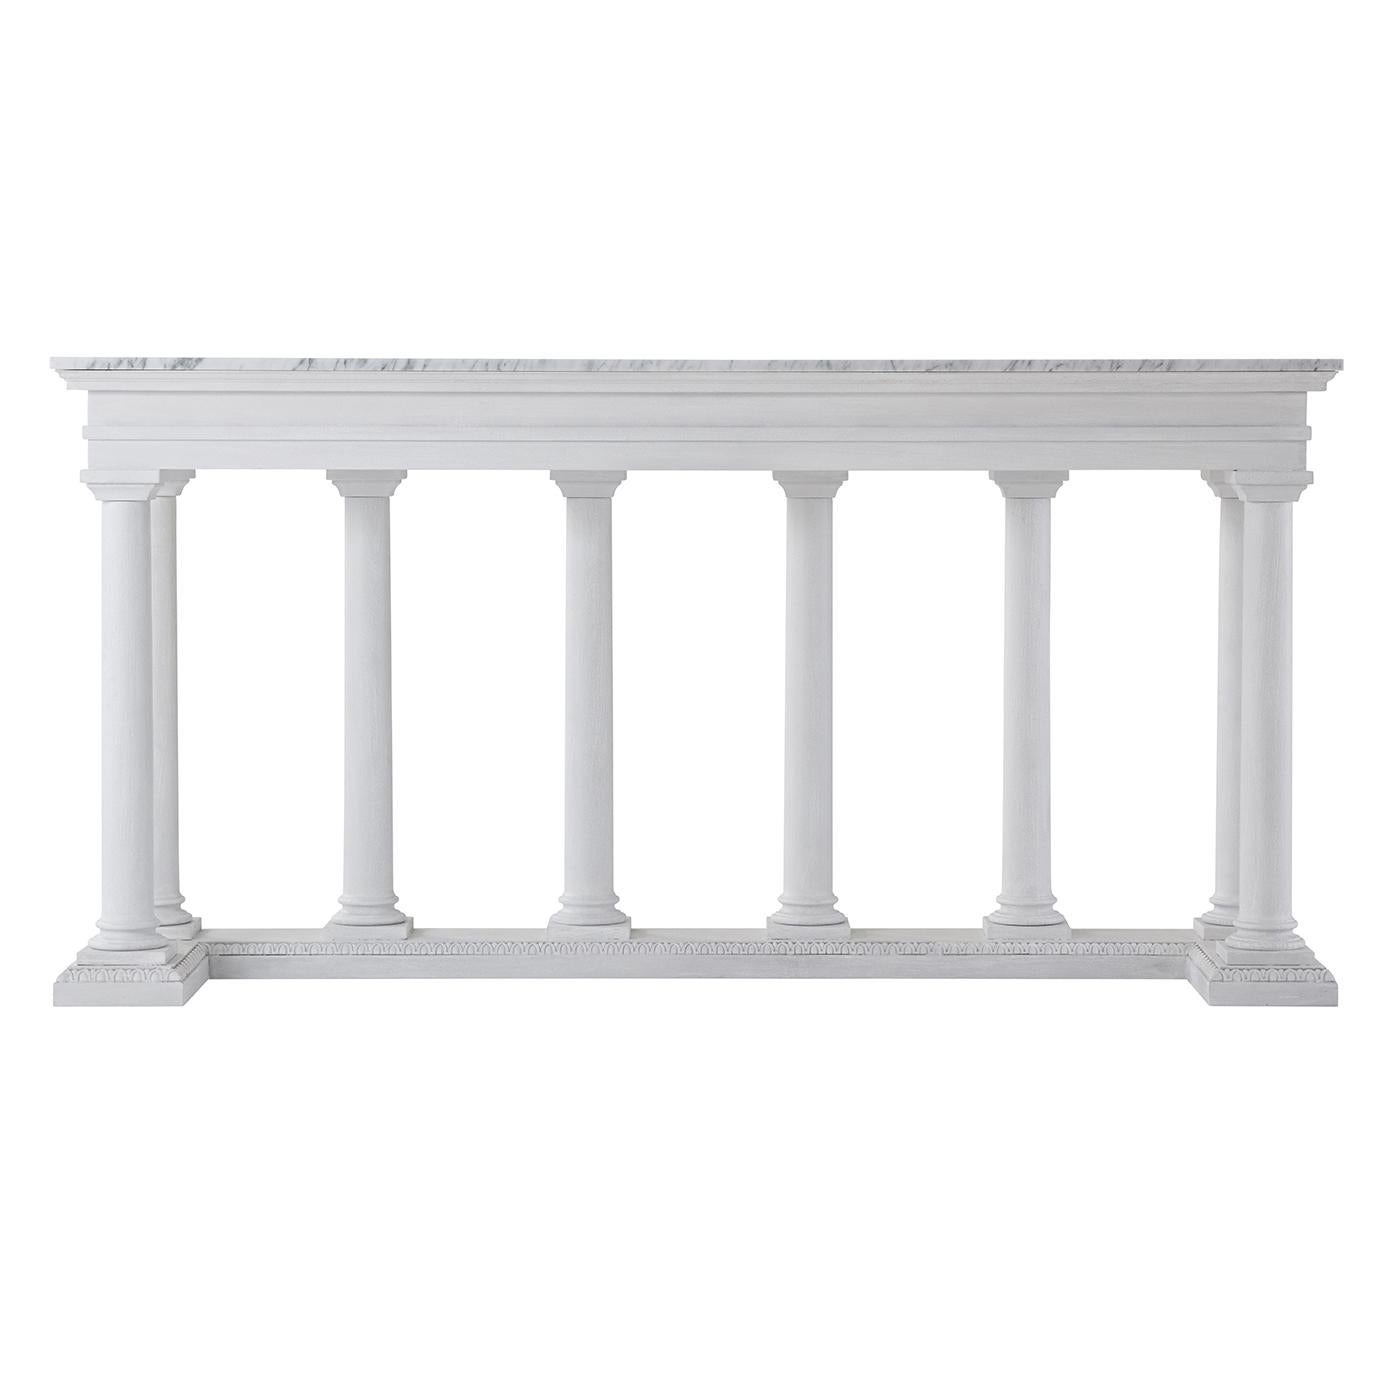 A French Empire style console table with a white Carrara marble top, a white painted finish on the eight-legged column-form base with a C form egg and dart carved plinth base.

Dimensions: 72